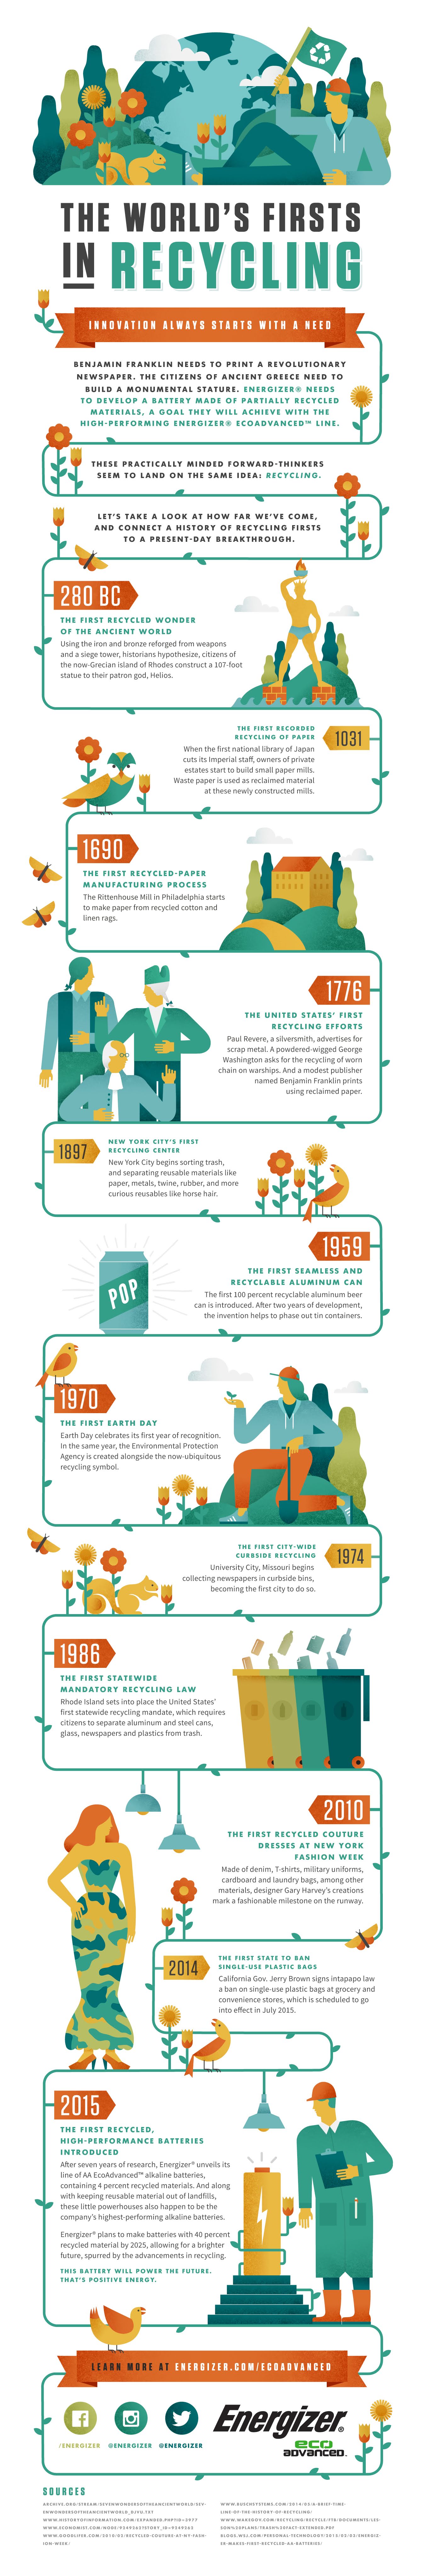 What Did Recycling Look Like In 280 BC? #infographic